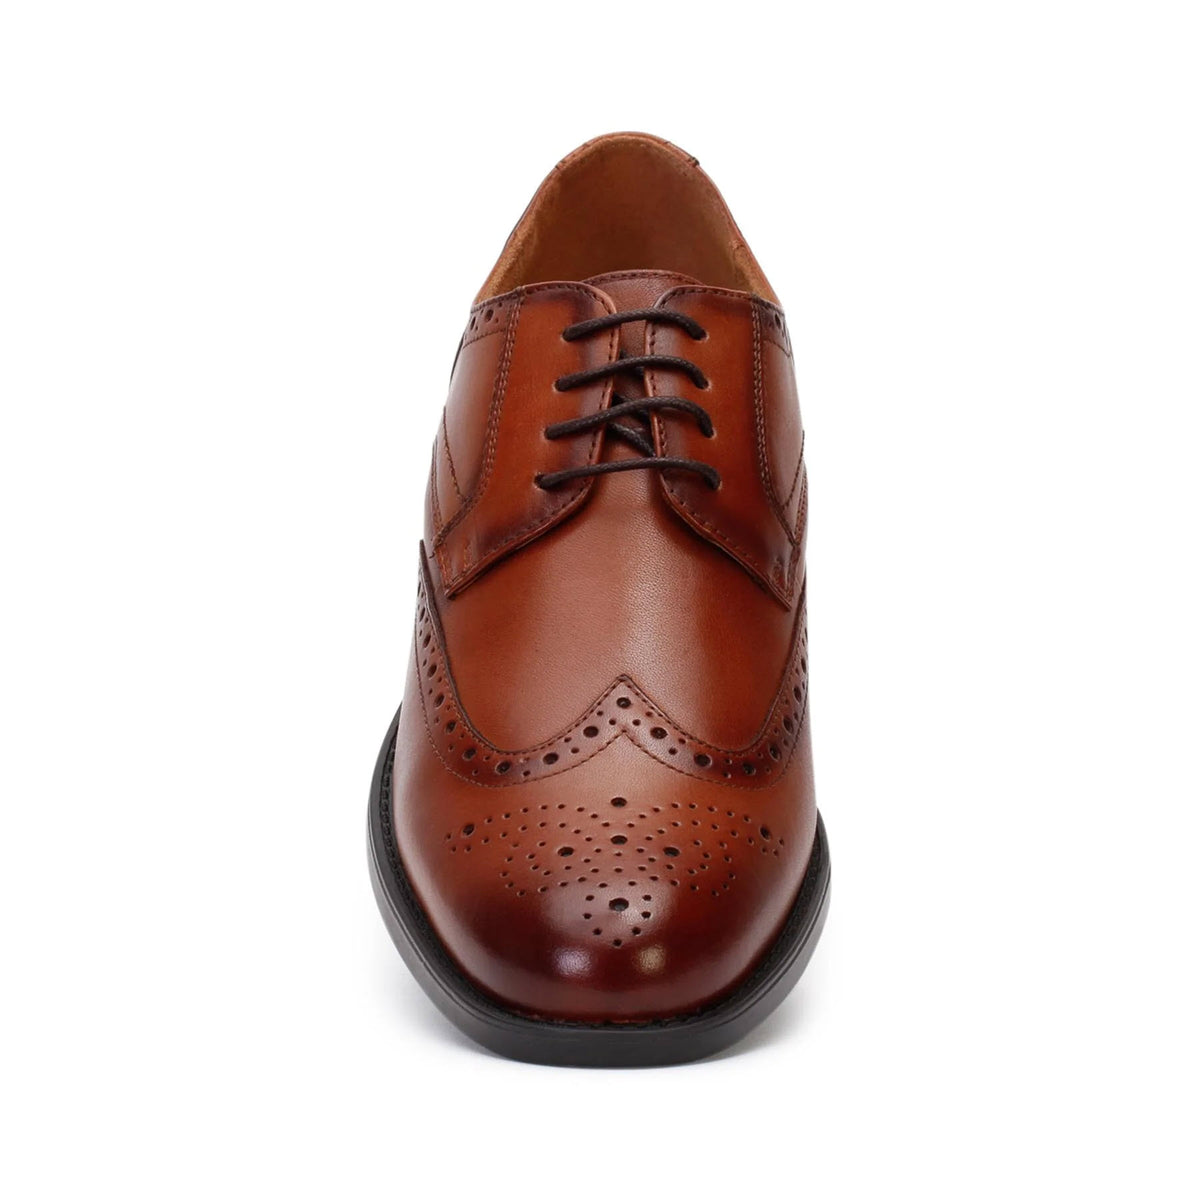 A single brown leather Florsheim Midtown Wingtip oxford shoe with brogue detailing and black laces on a white background.